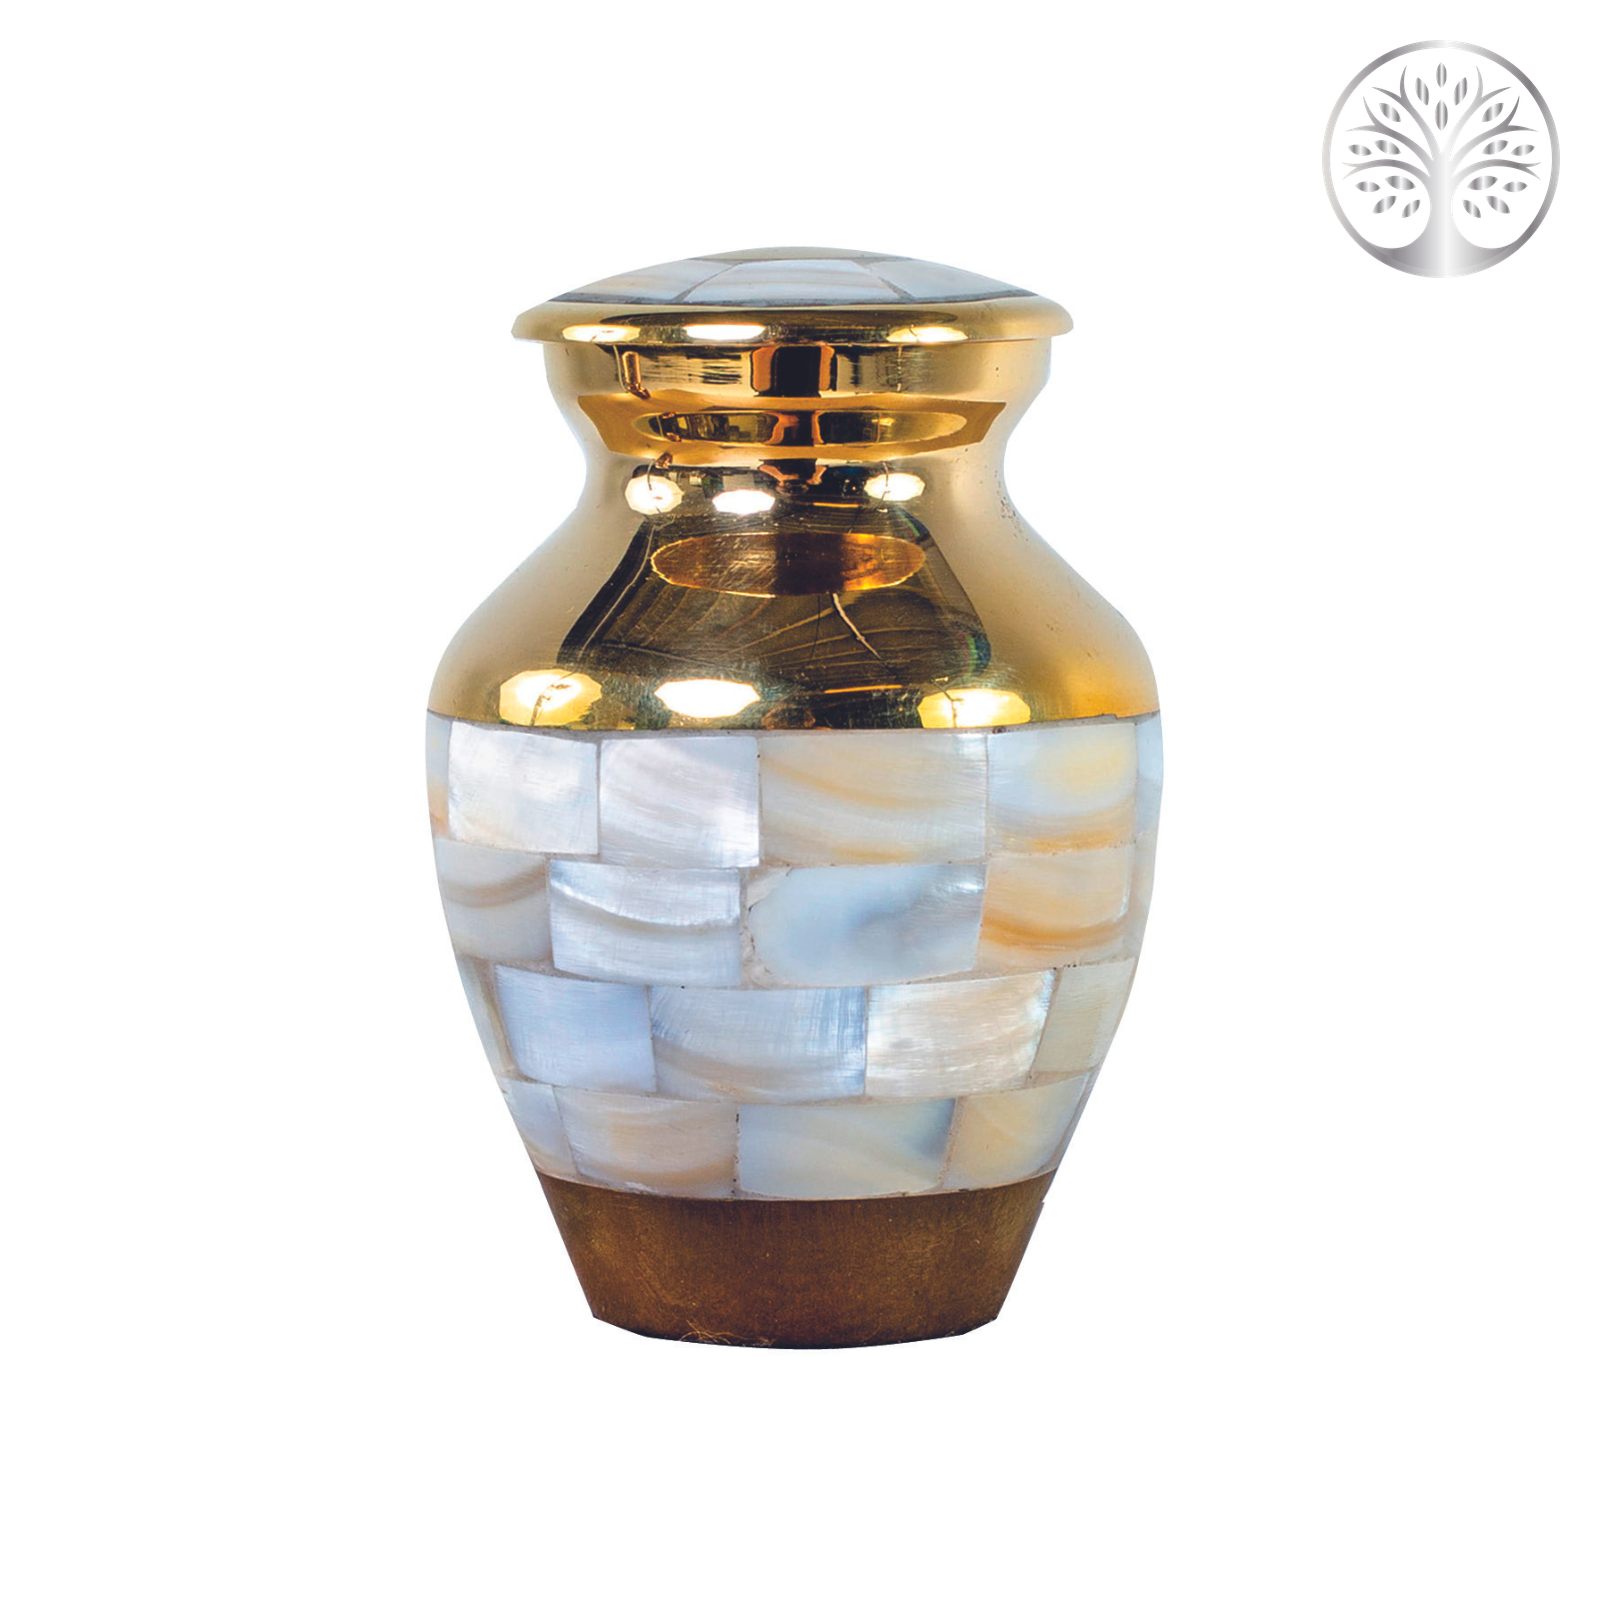 Gold and Mother of Pearl Keepsake Urn